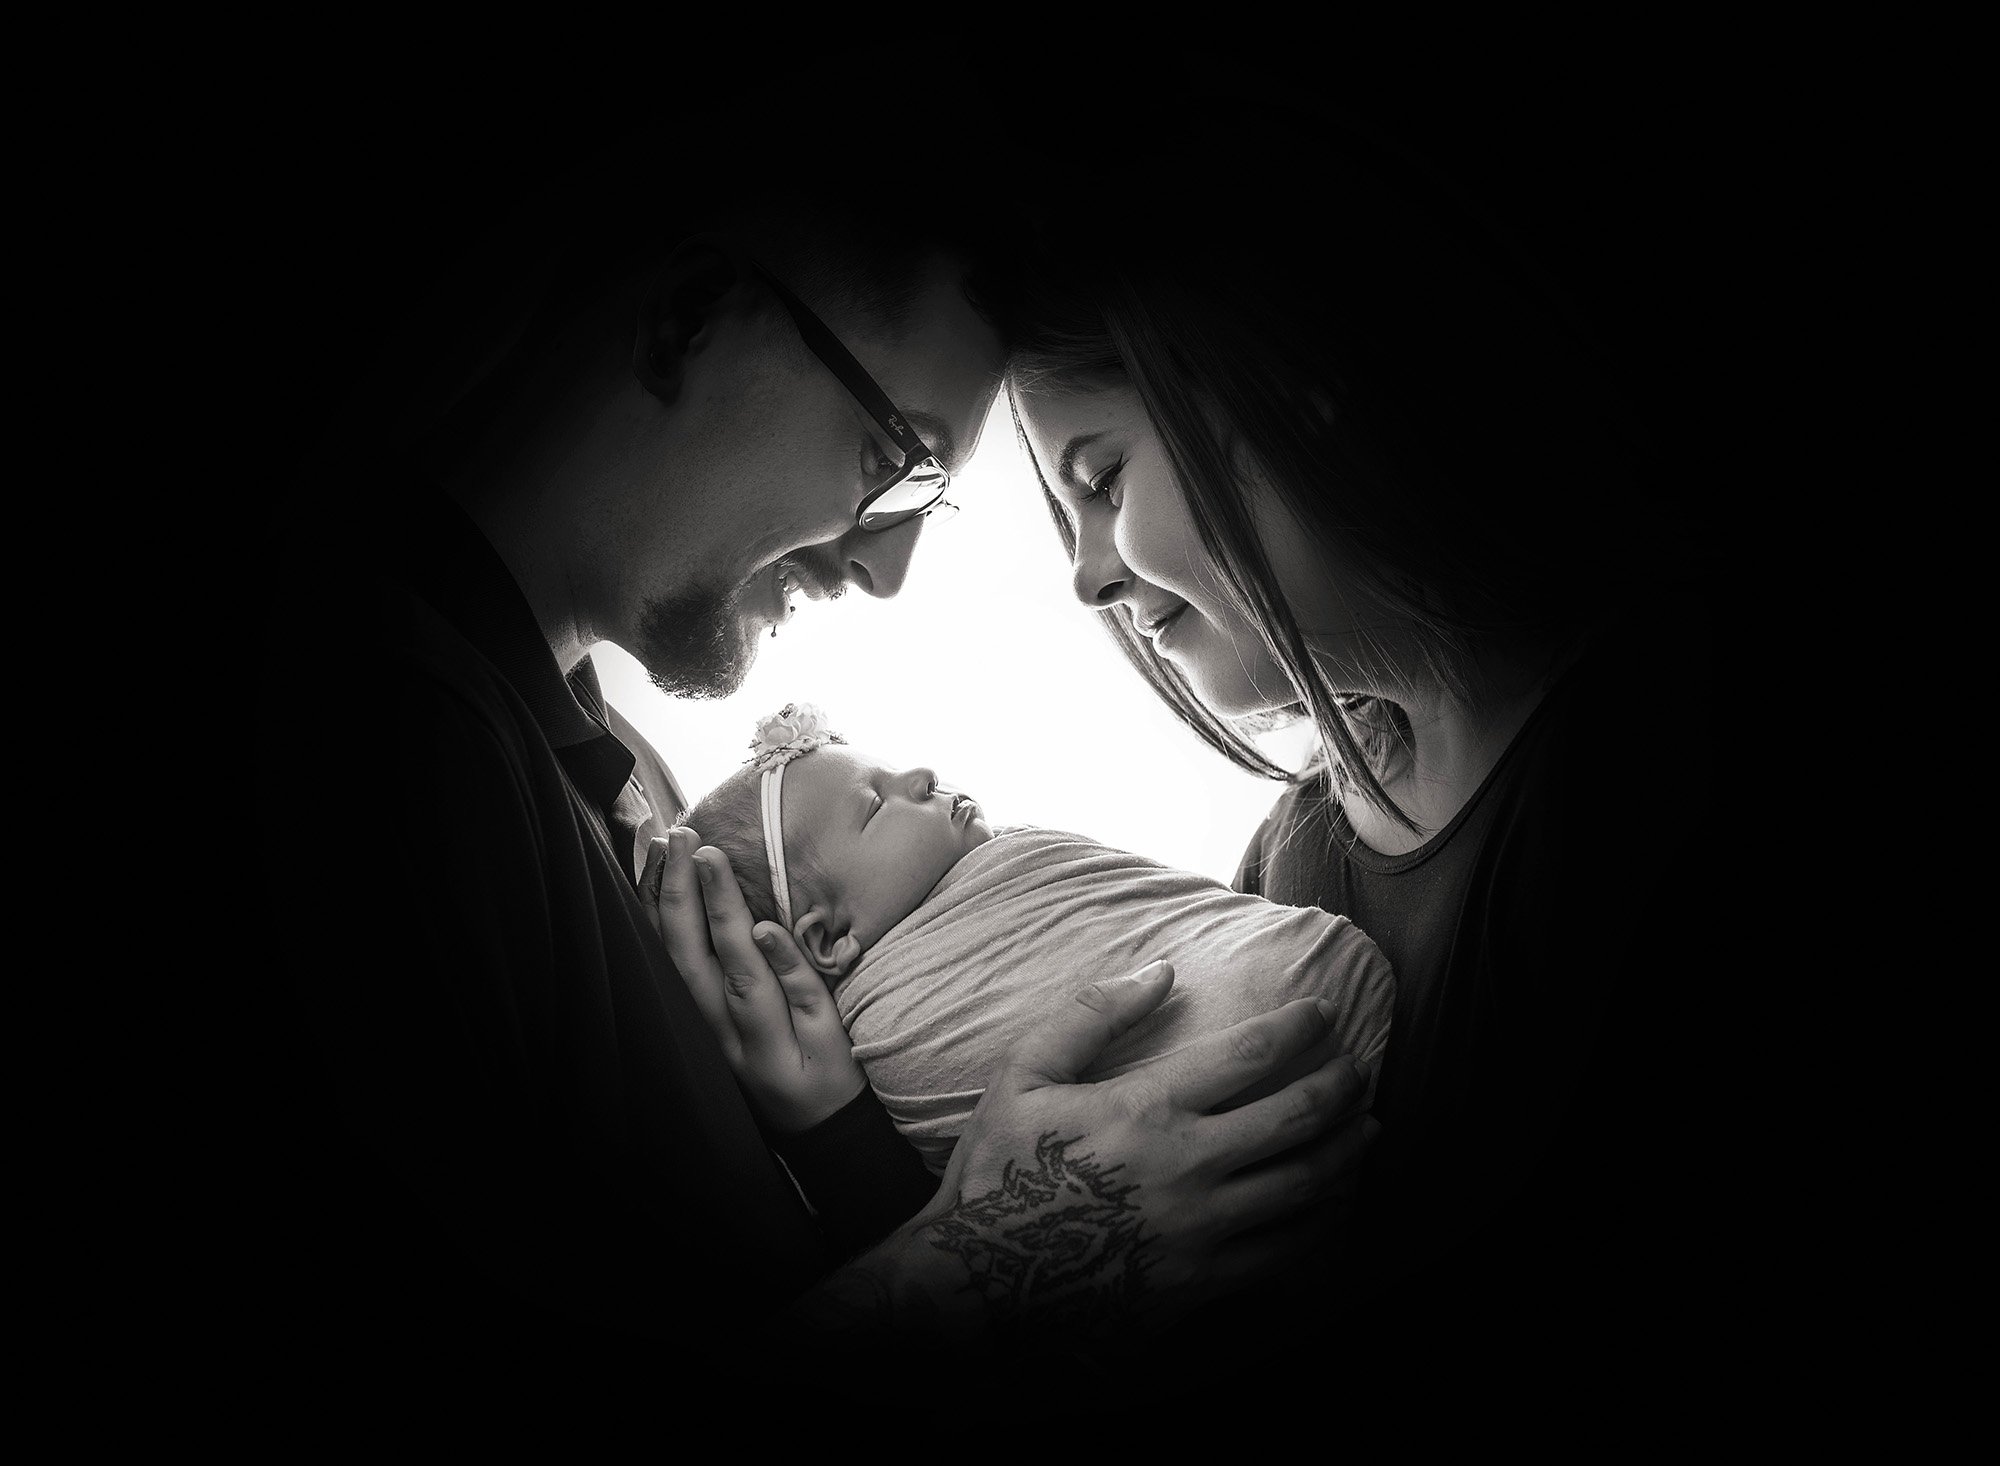 silhouette shadow of new parents face's while cradling their newborn baby girl